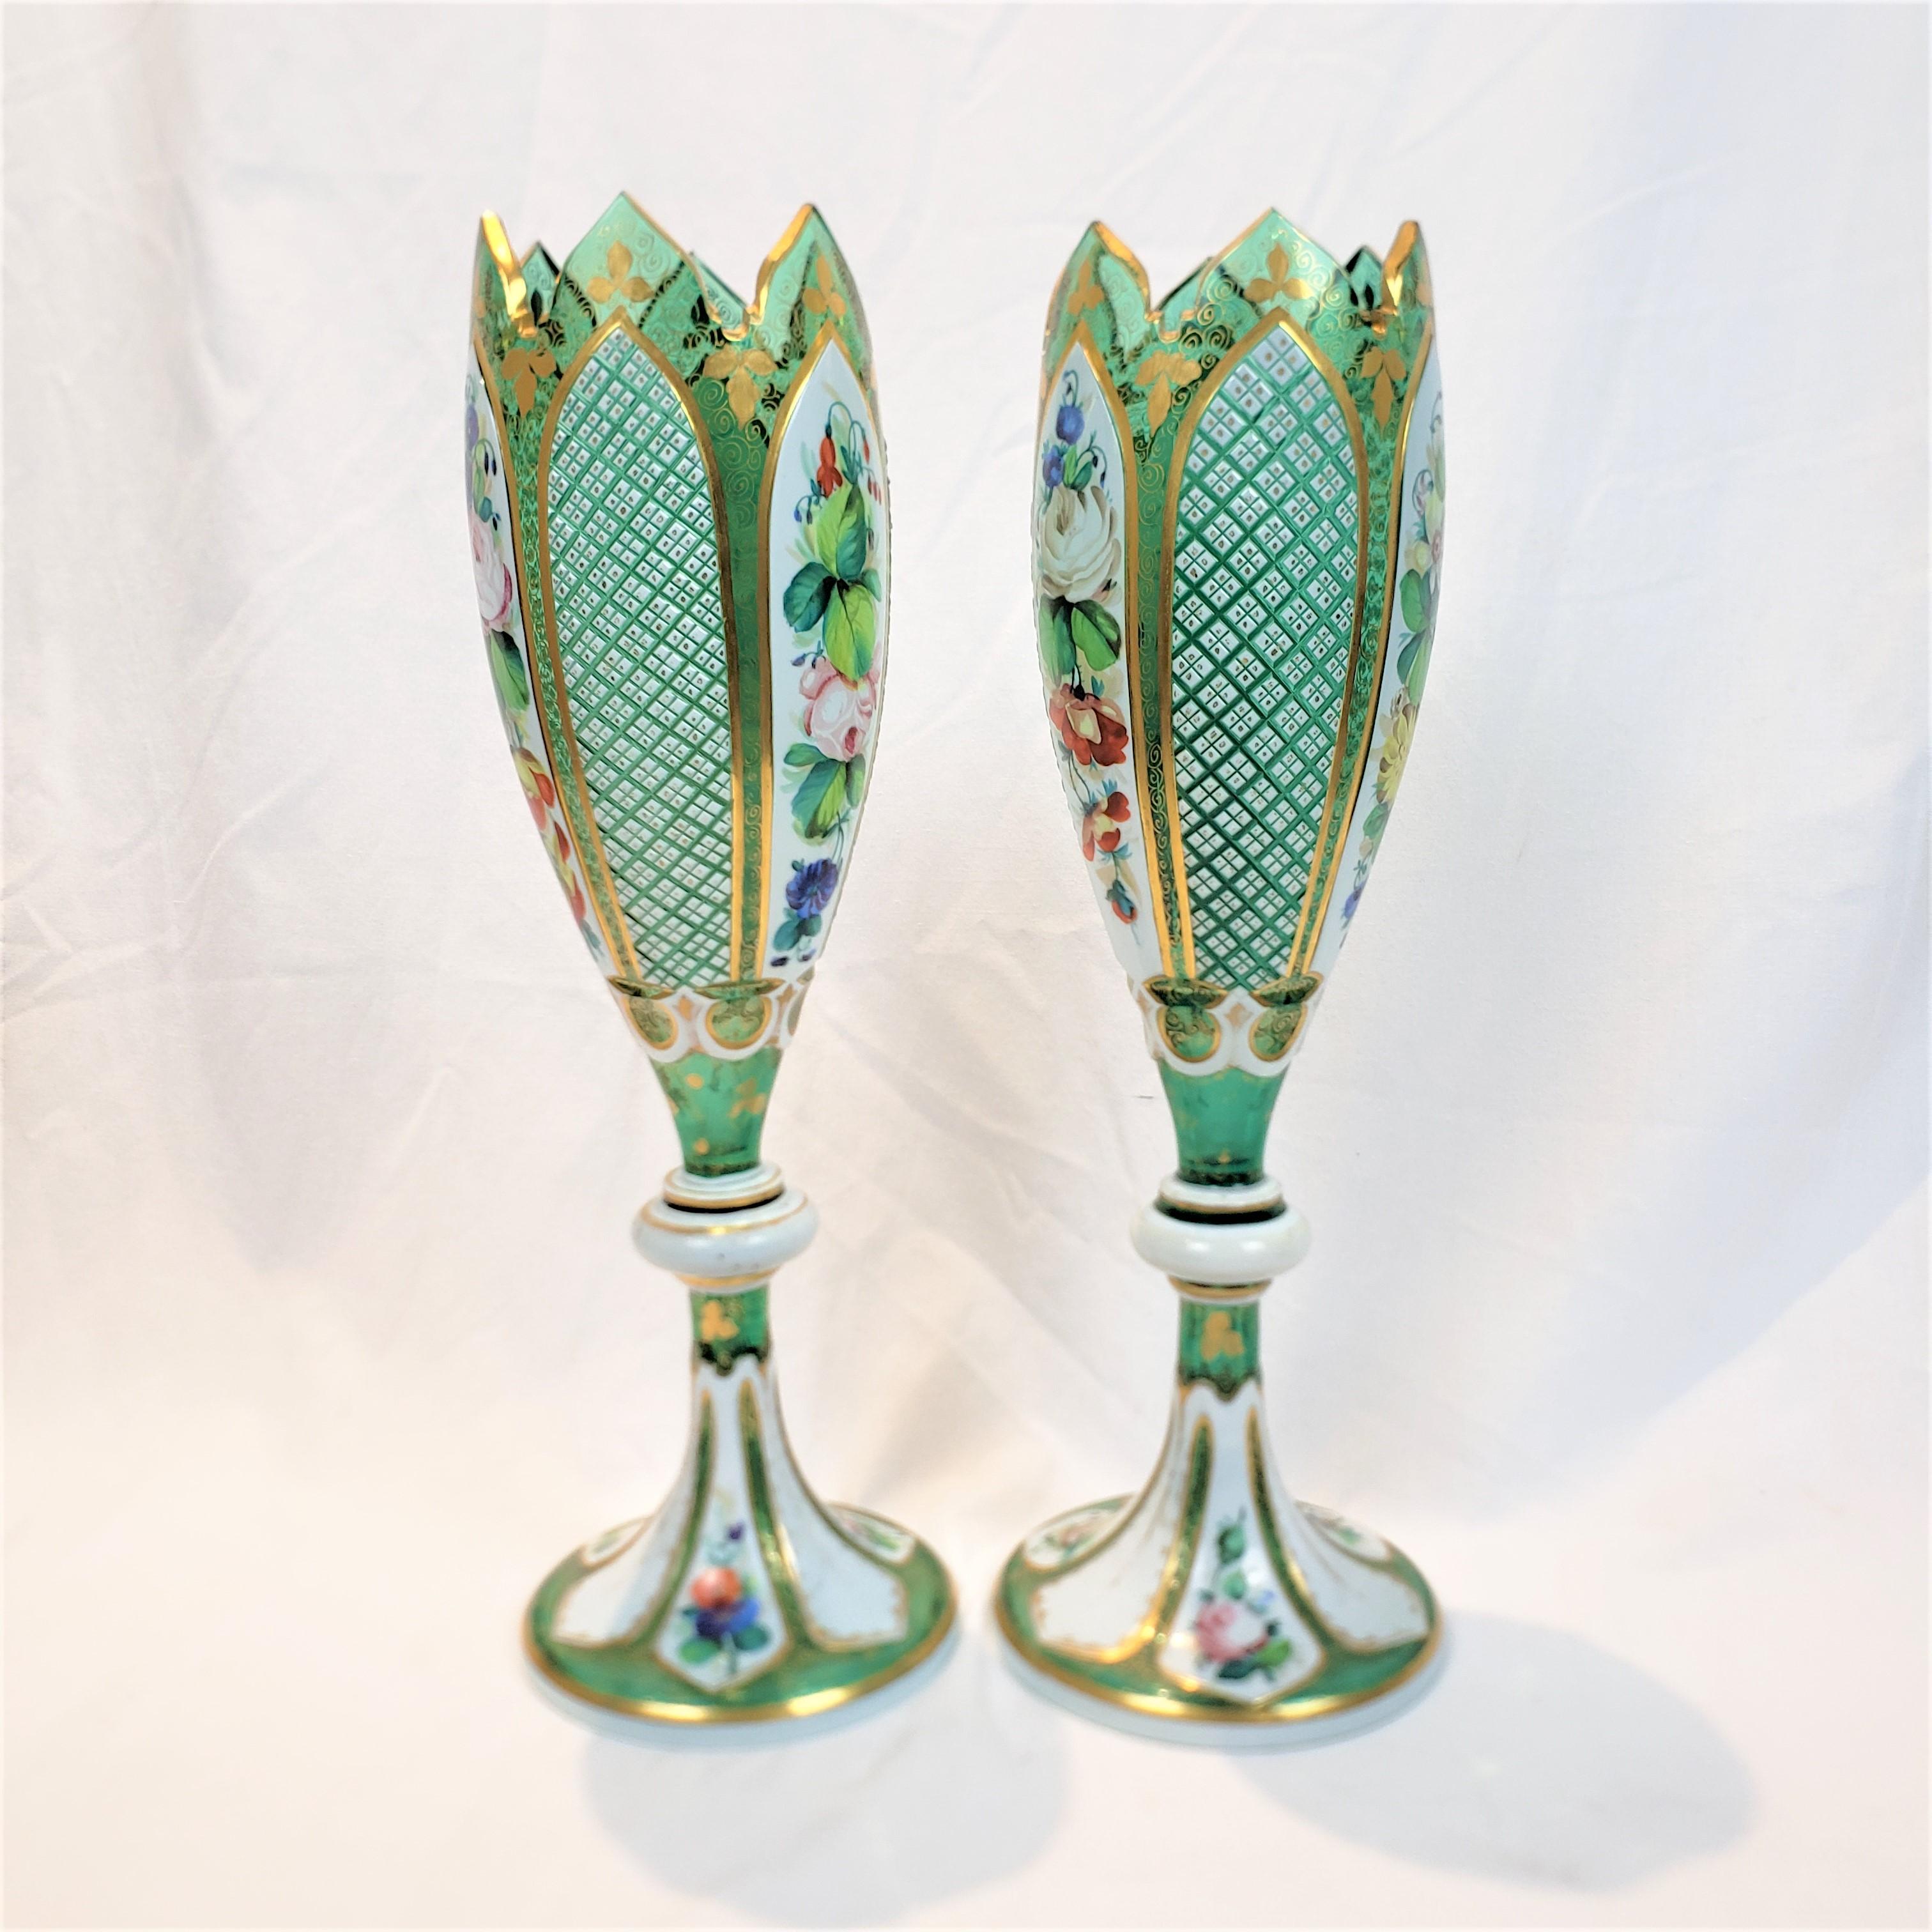 Late Victorian Pair of Antique Moser Style Green Glass Vases with Enamelled Panels & Gilt Decor